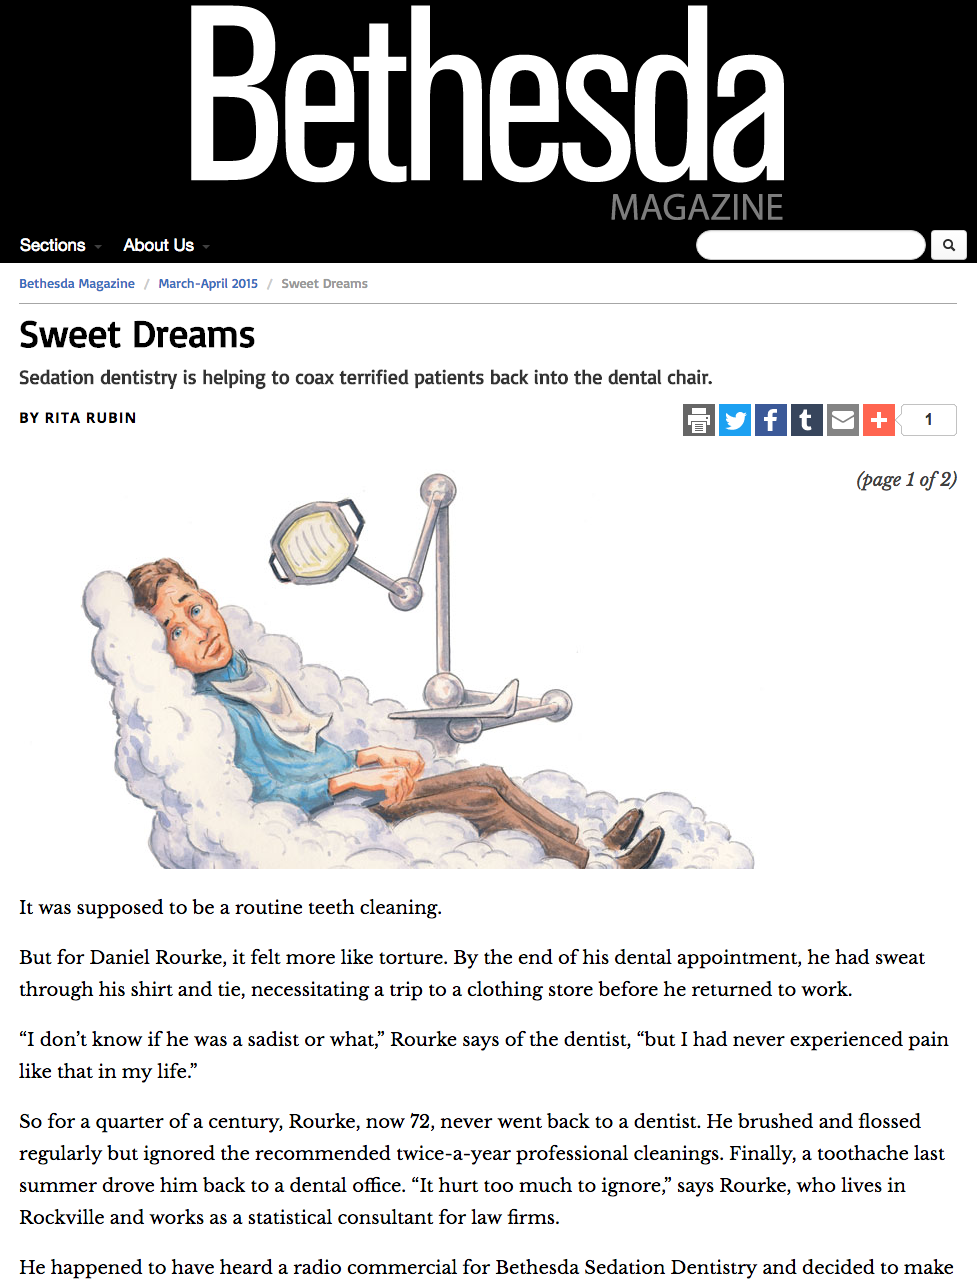 Article by Rita Rubin for Bethesda Magazine March/April 2015 article. Sweet Dreams: Sedation dentistry is helping to coax terrified patients back into the dental chair.